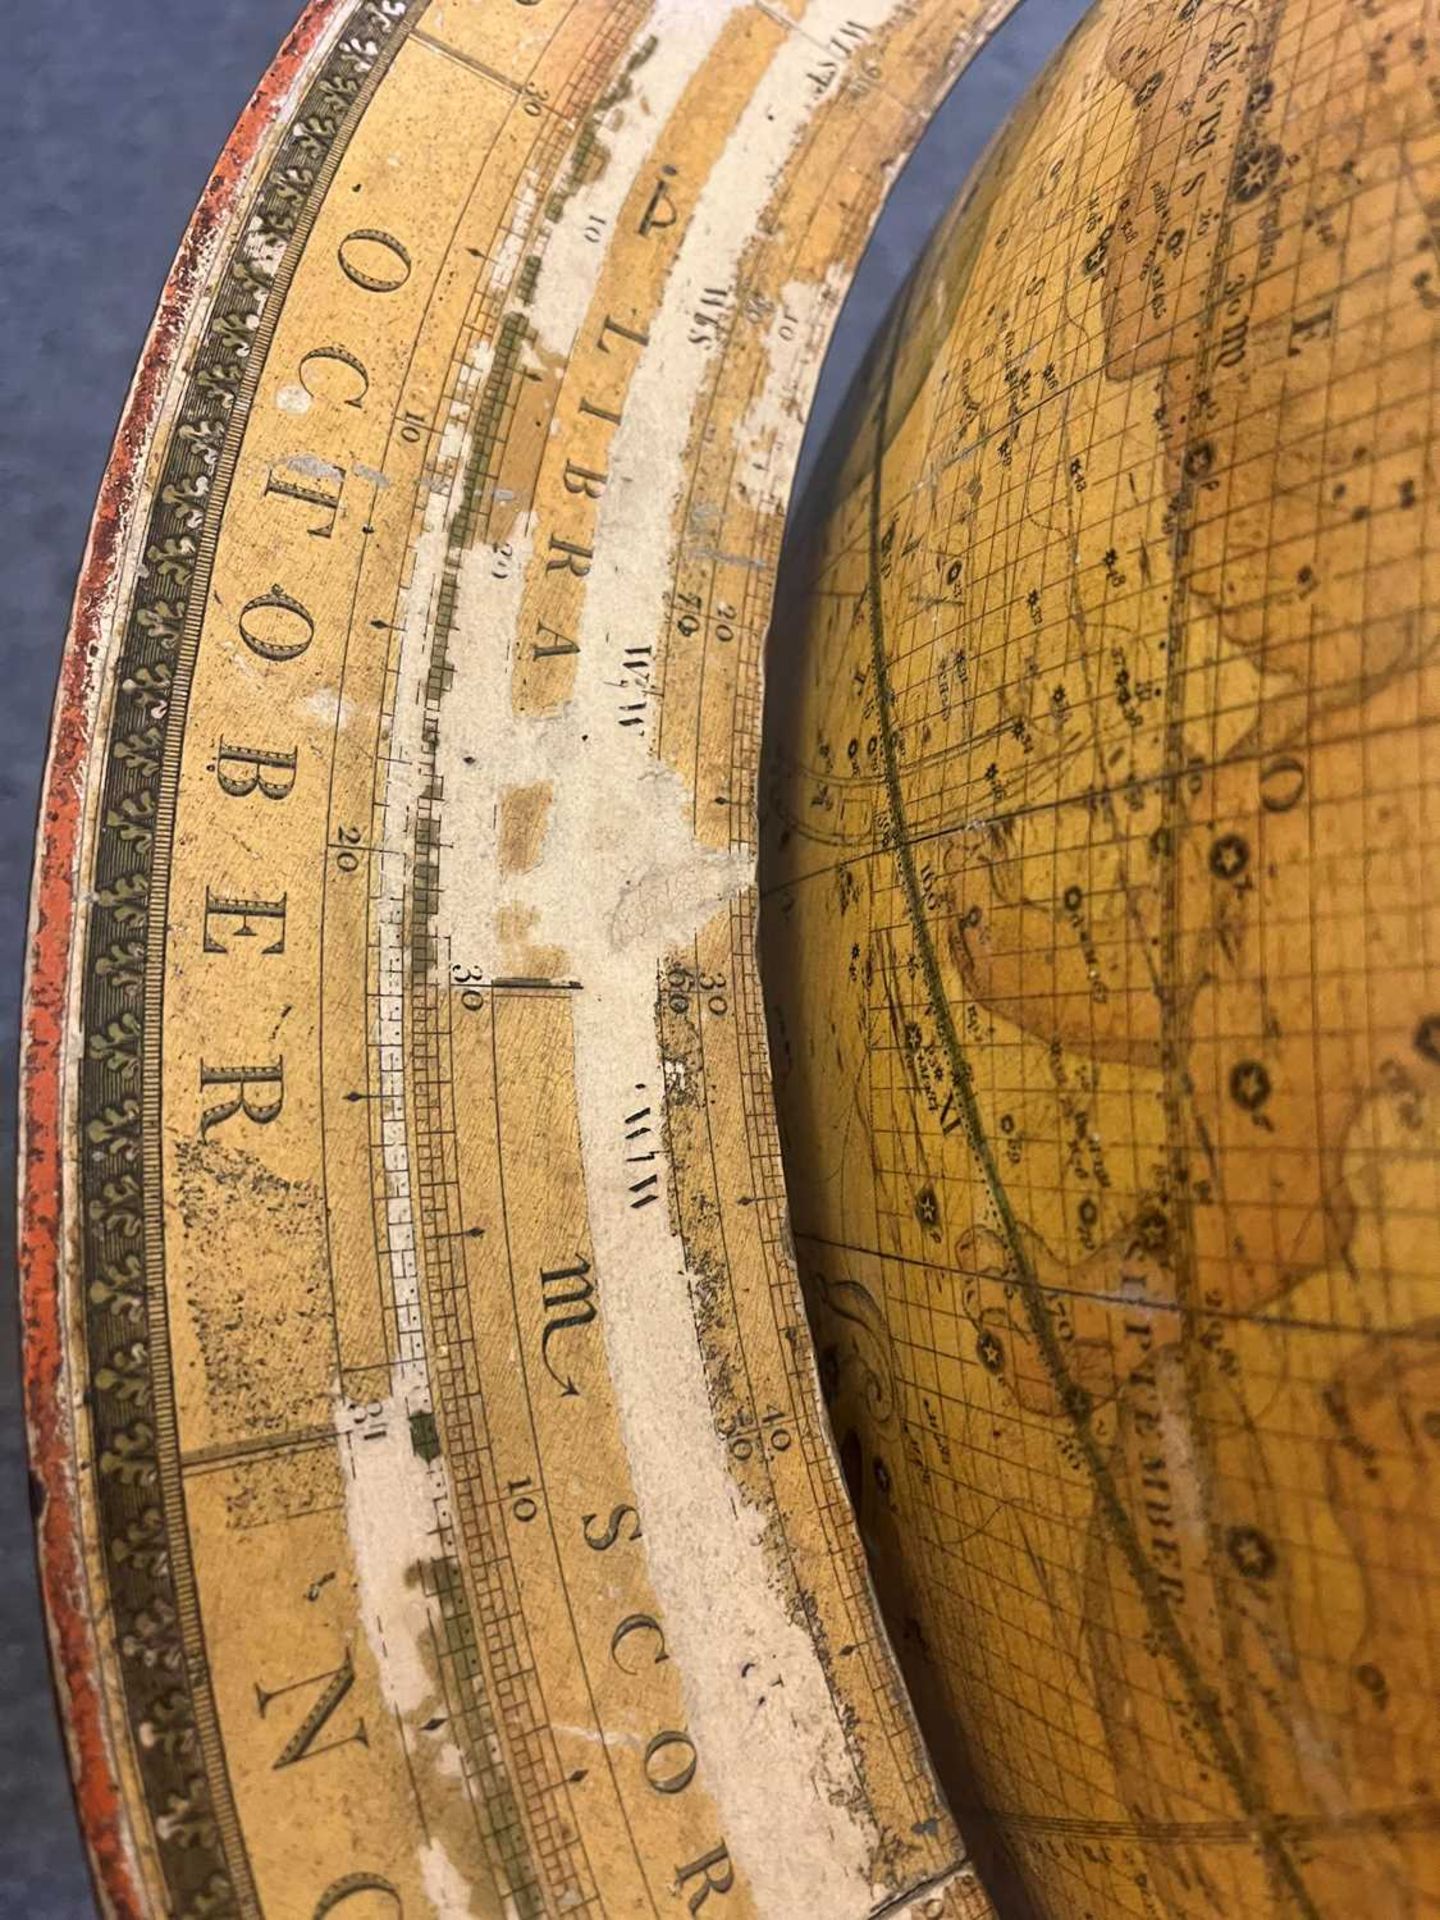 A large celestial library globe by J & W Cary, - Image 78 of 84